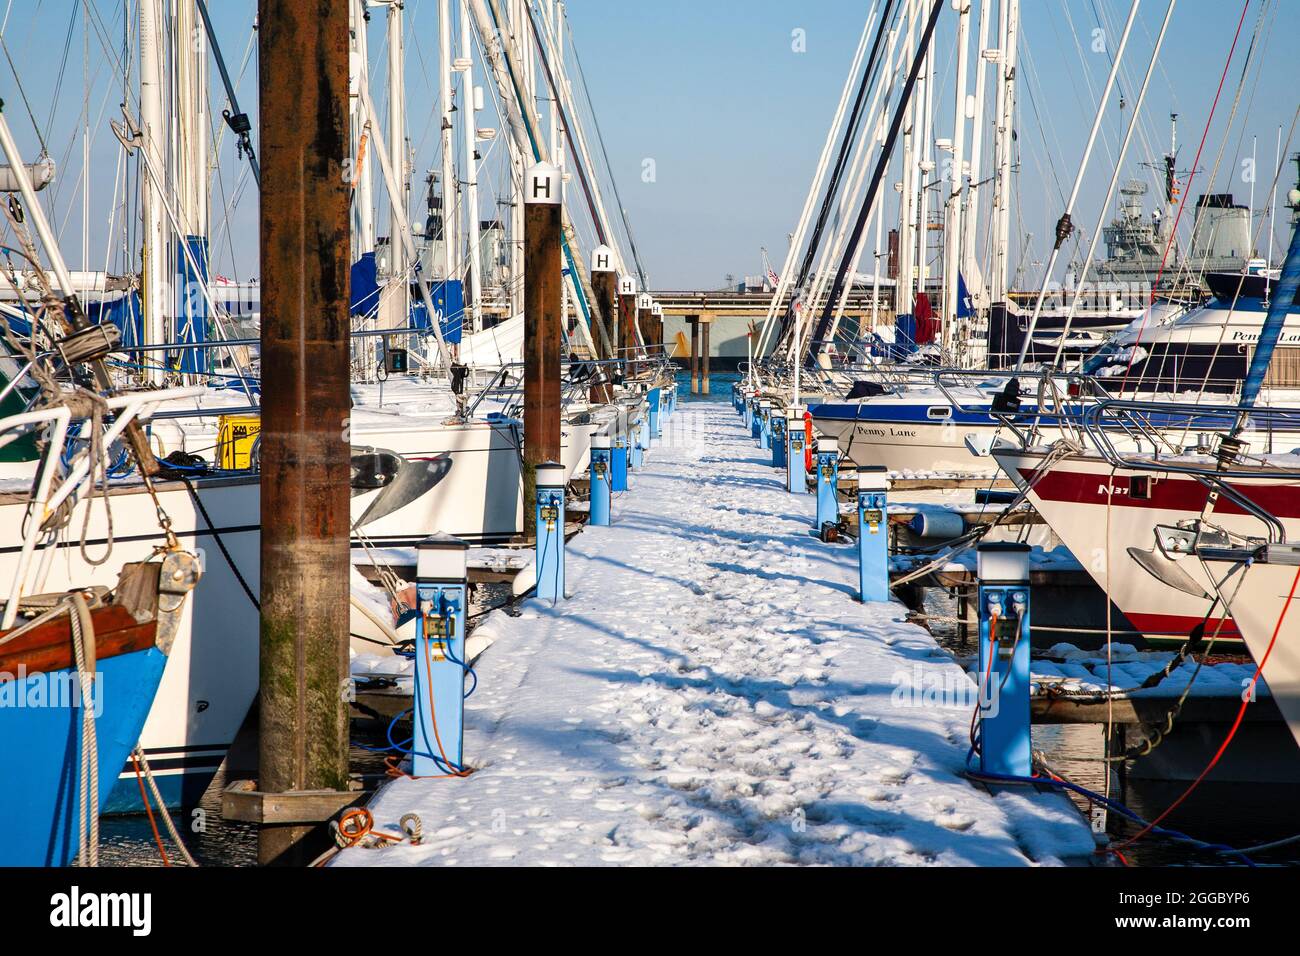 Ice and snow covered marina pontoon with yachts berthed on finger pontoons. Gosport, UK. 2010 Stock Photo